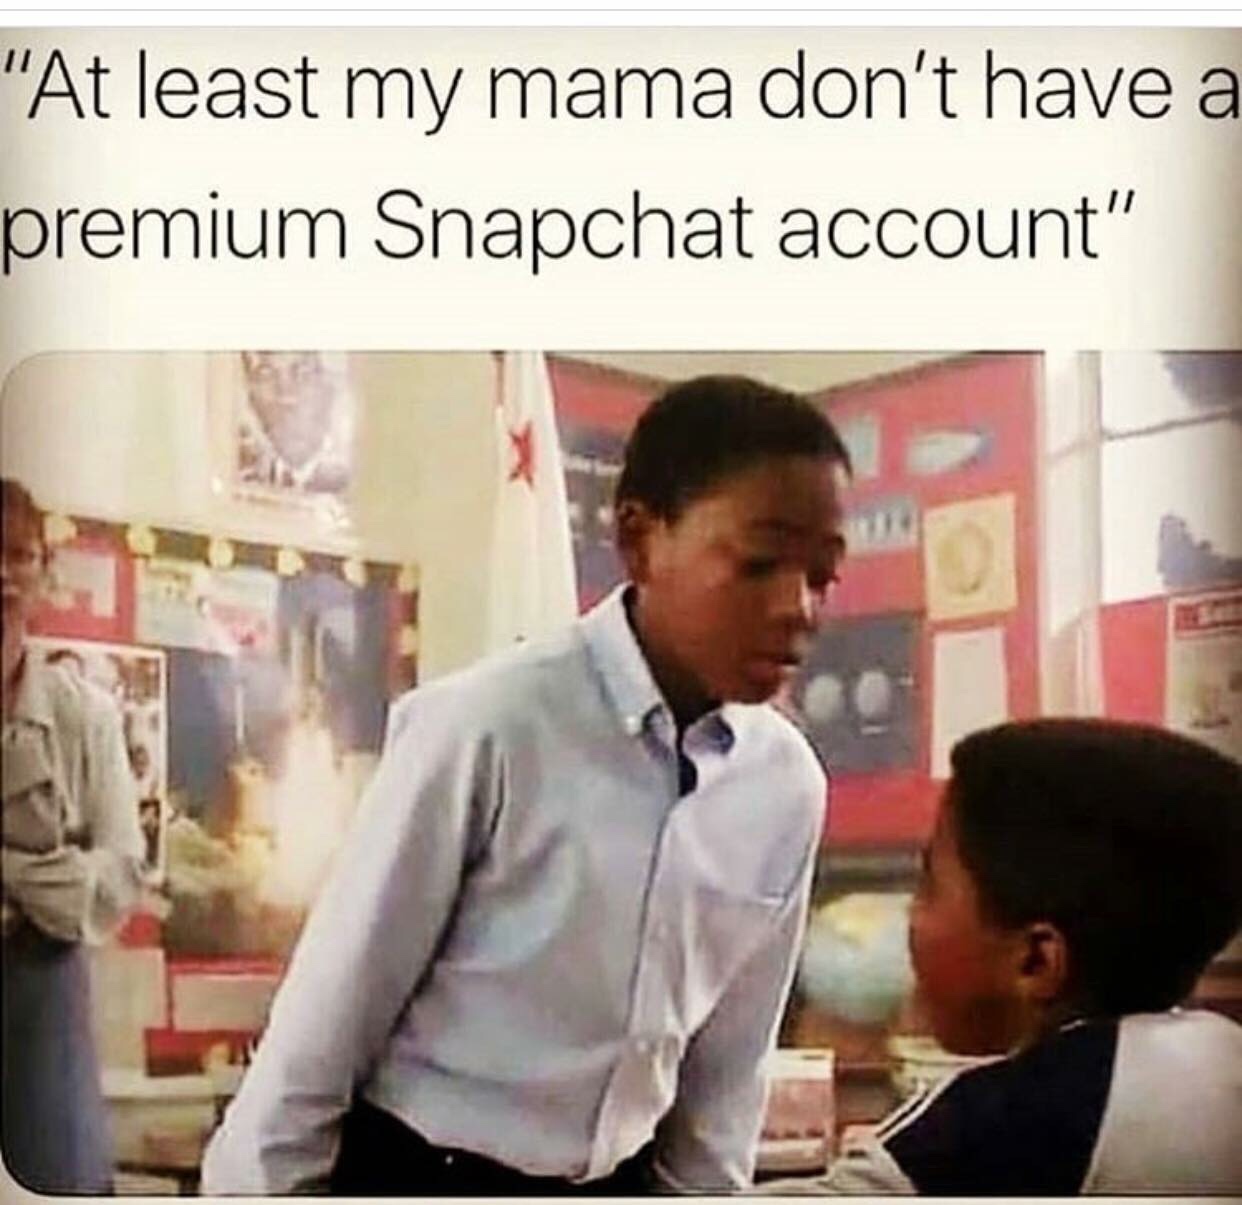 least my mom doesn t have a premium snapch - "At least my mama don't have a premium Snapchat account"